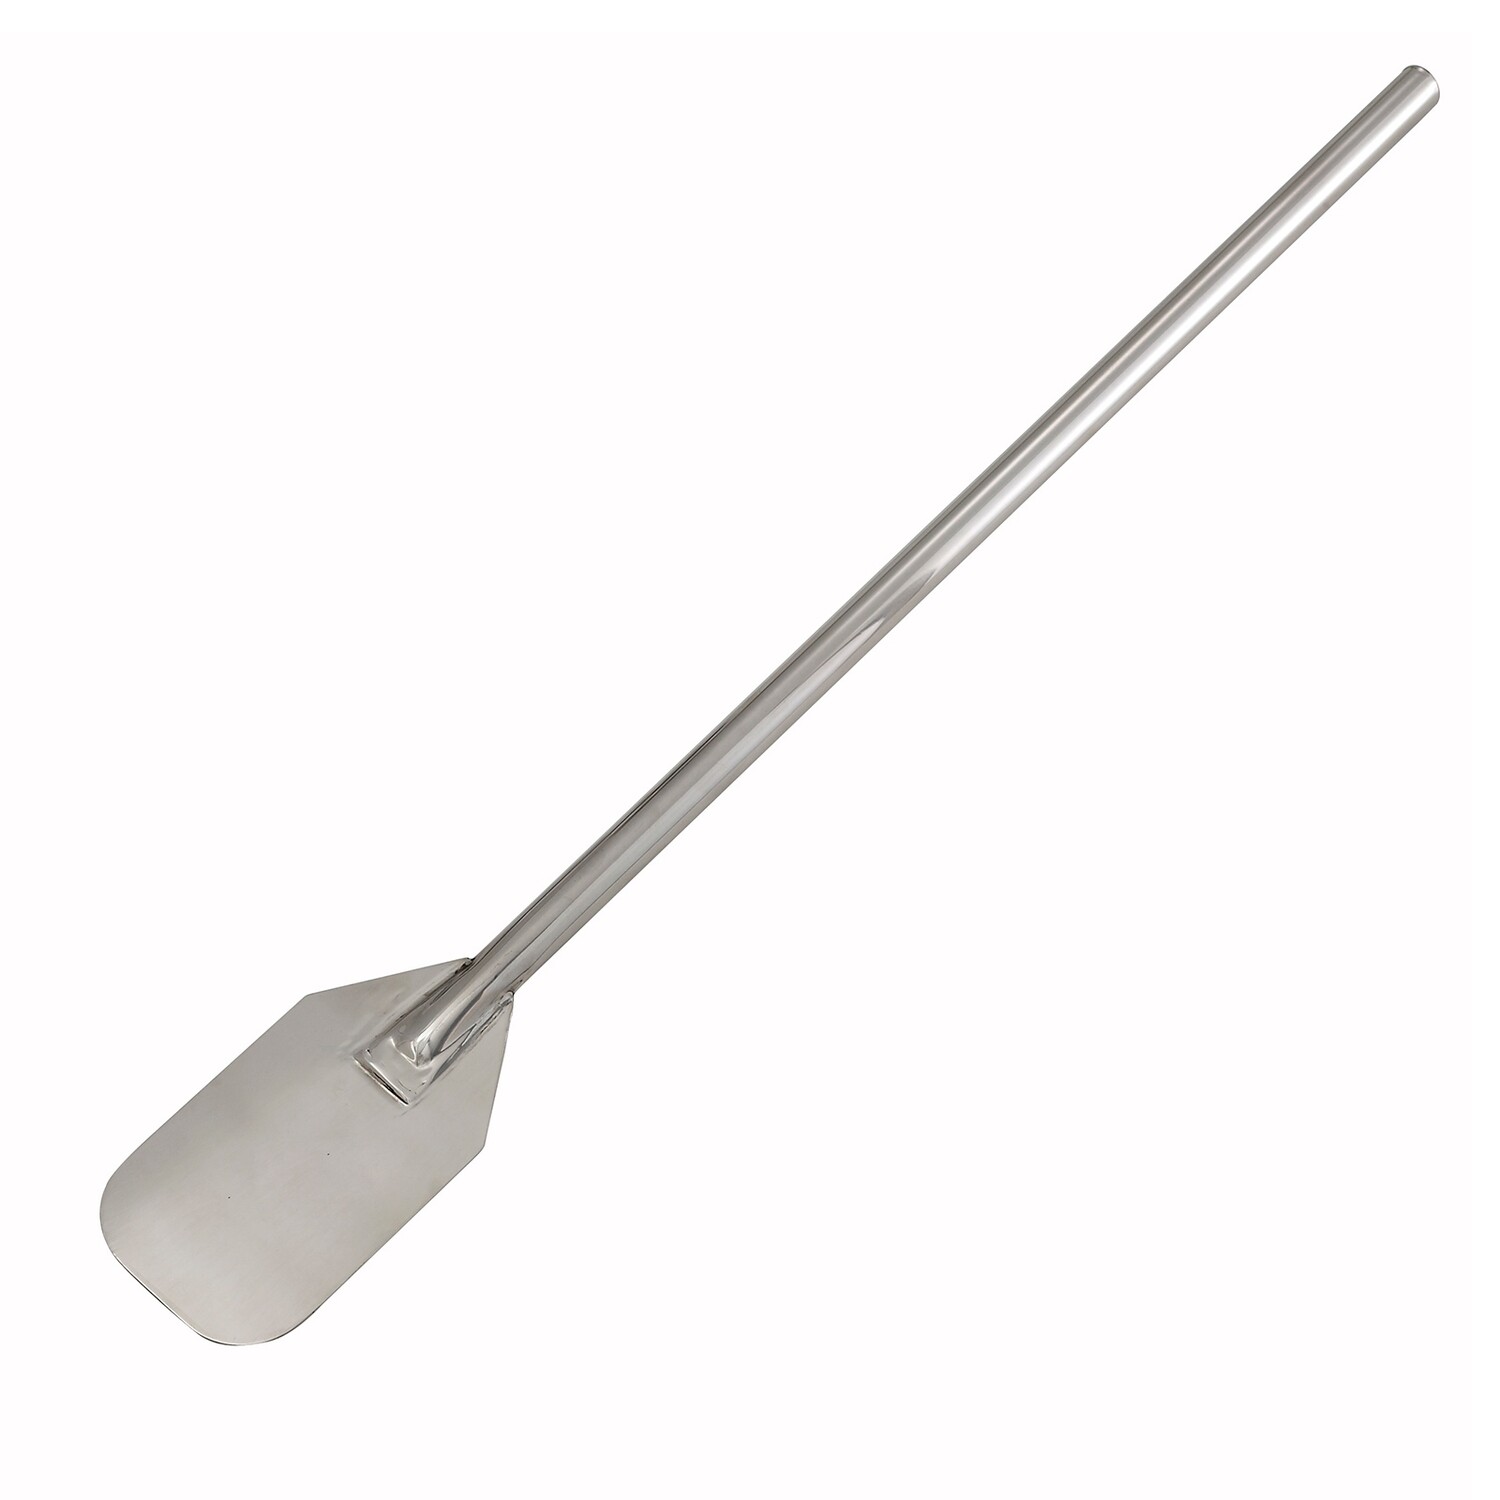 Winco MPD-36 Mixing Paddle, 36", stainless steel